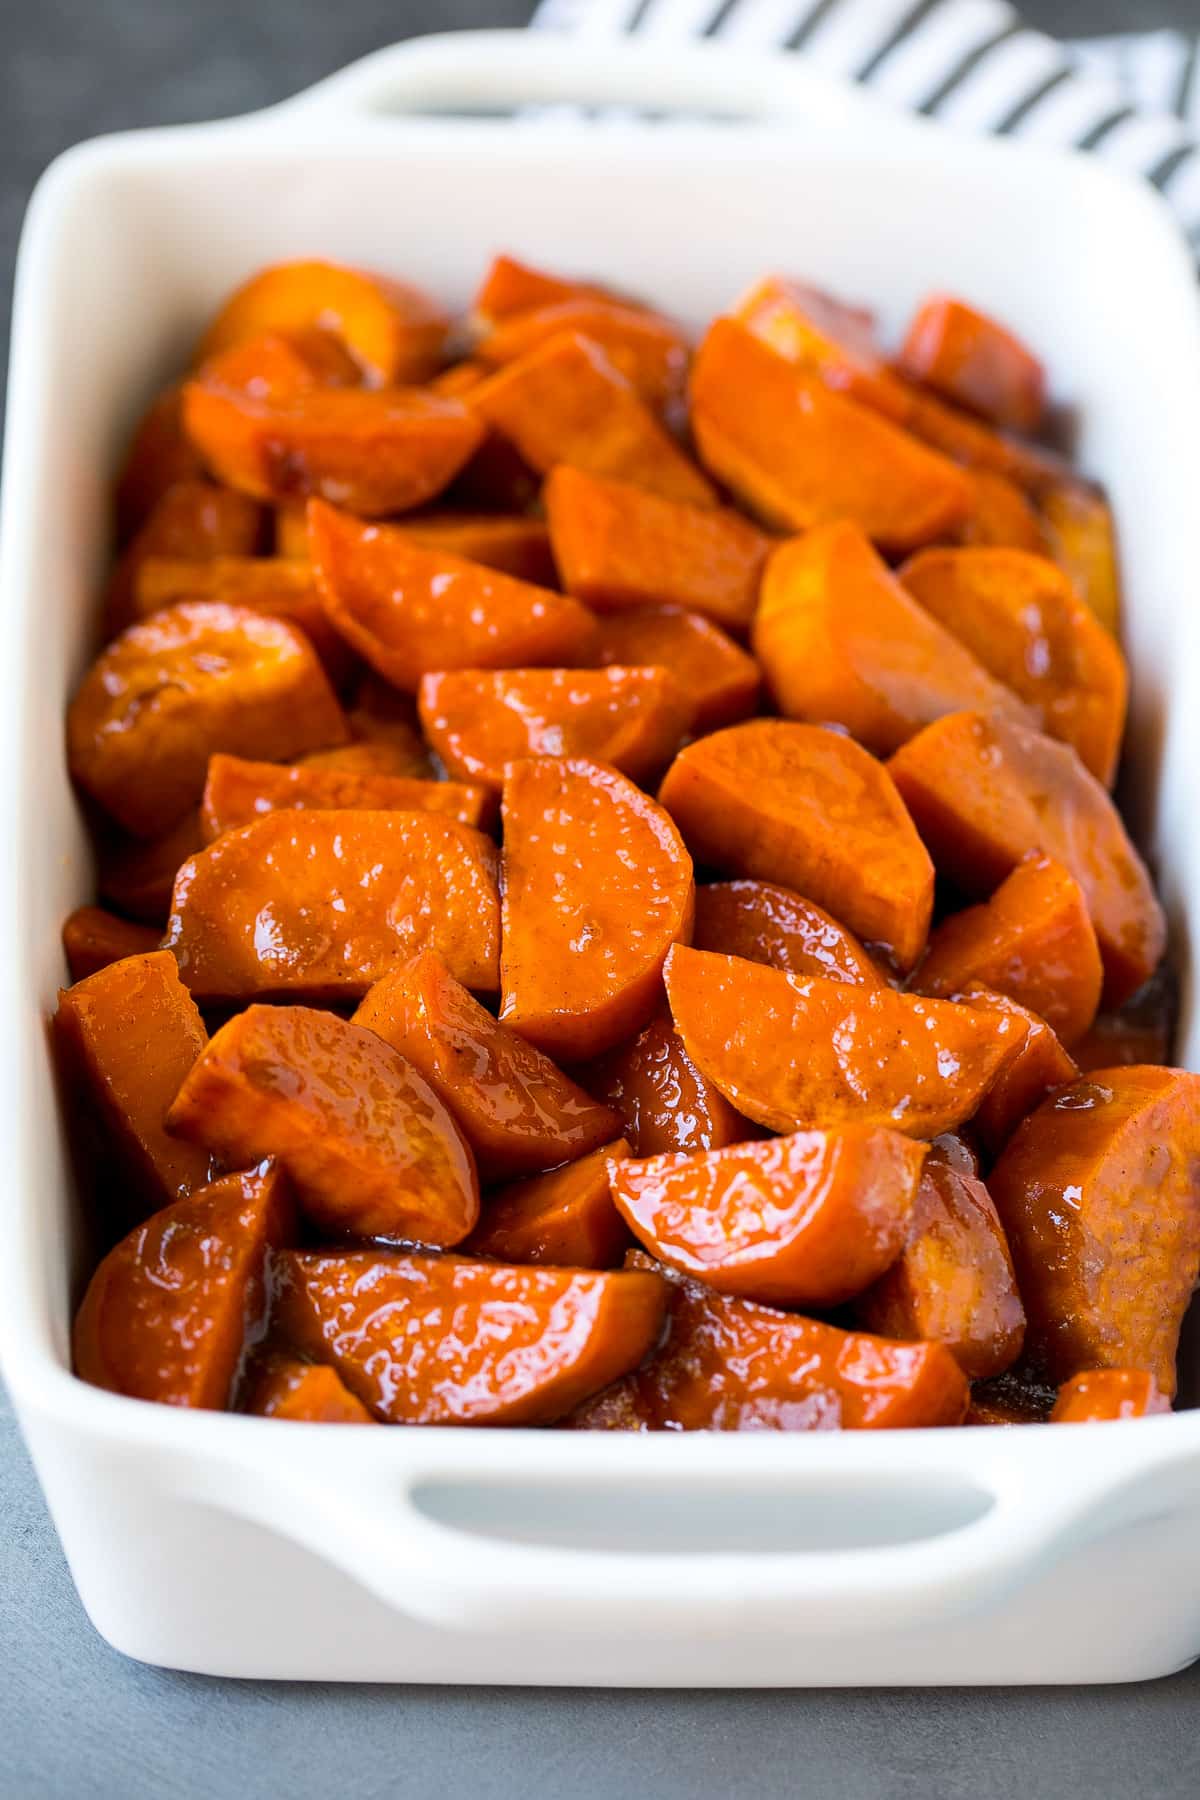 A pan of sweet potatoes cooked in butter and sugar.